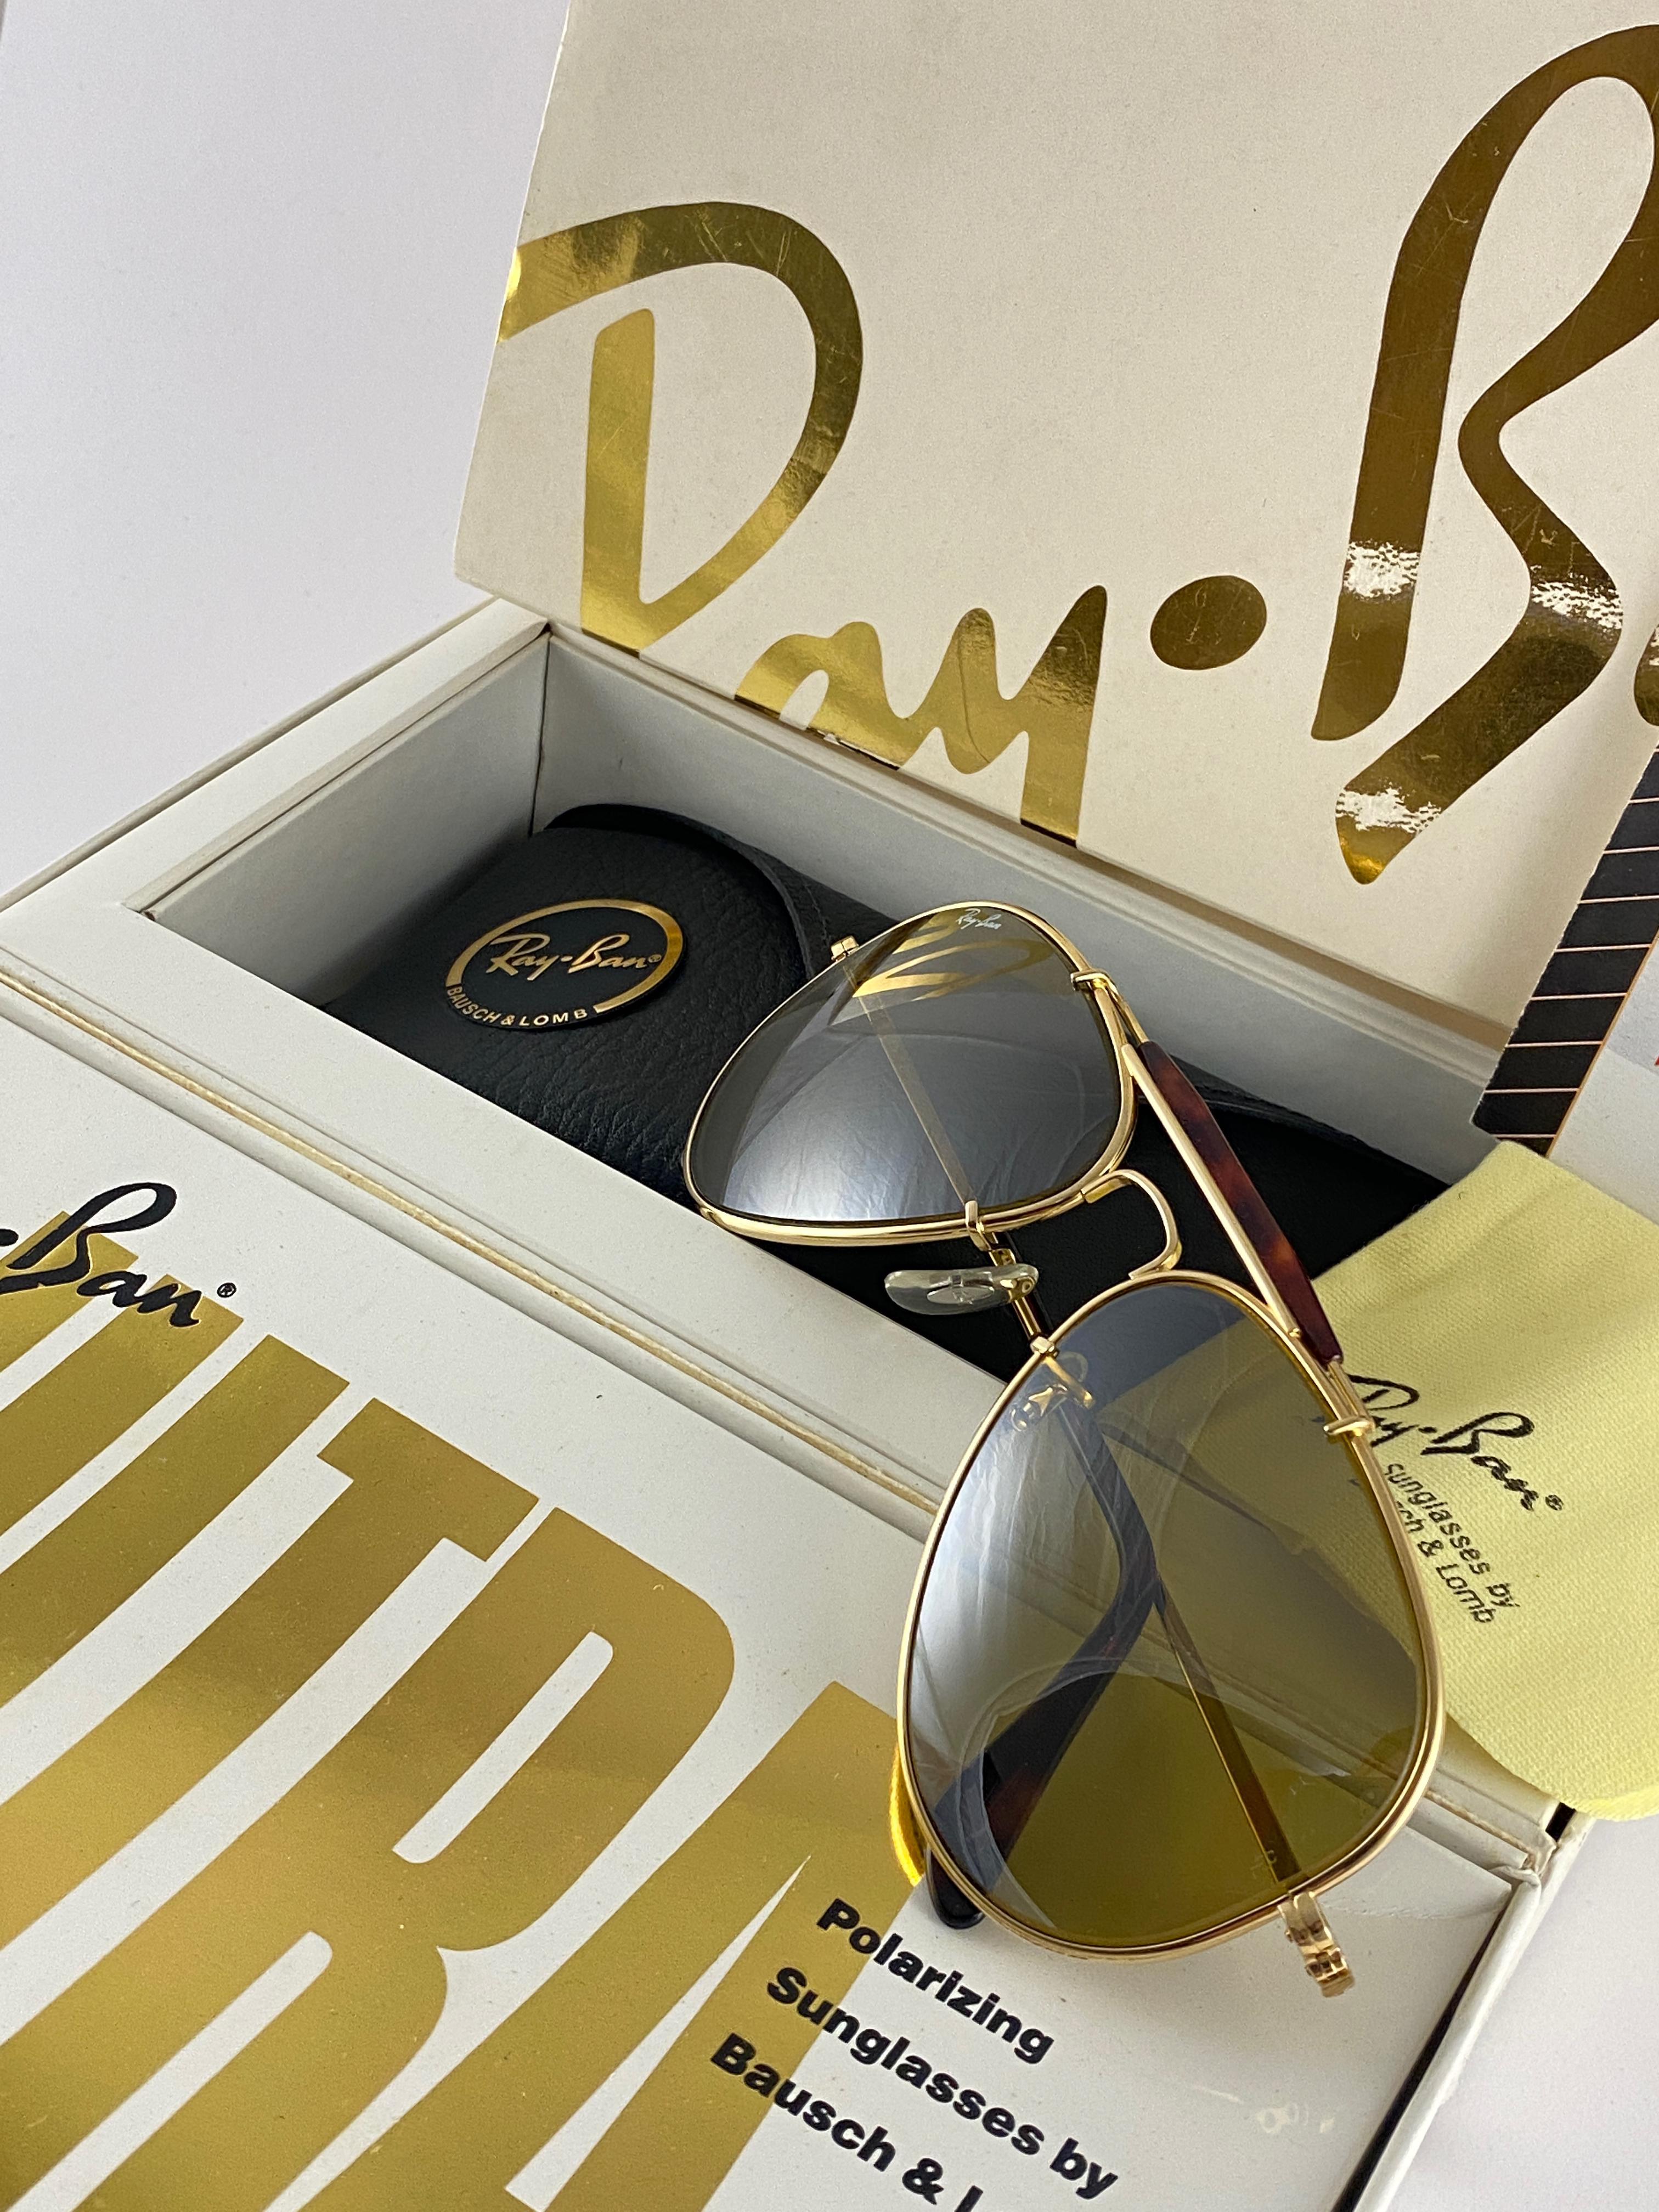 New Collector's Item Full set Ray Ban ULTRA Deep Groove Gold Bravura frame with RB 50 mirrored lenses. 
A pair hardly seen up for sale, specially on this new, unworn condition.

Dark tortoise brow bar over a Arista, extra thick gold frame.

Full set